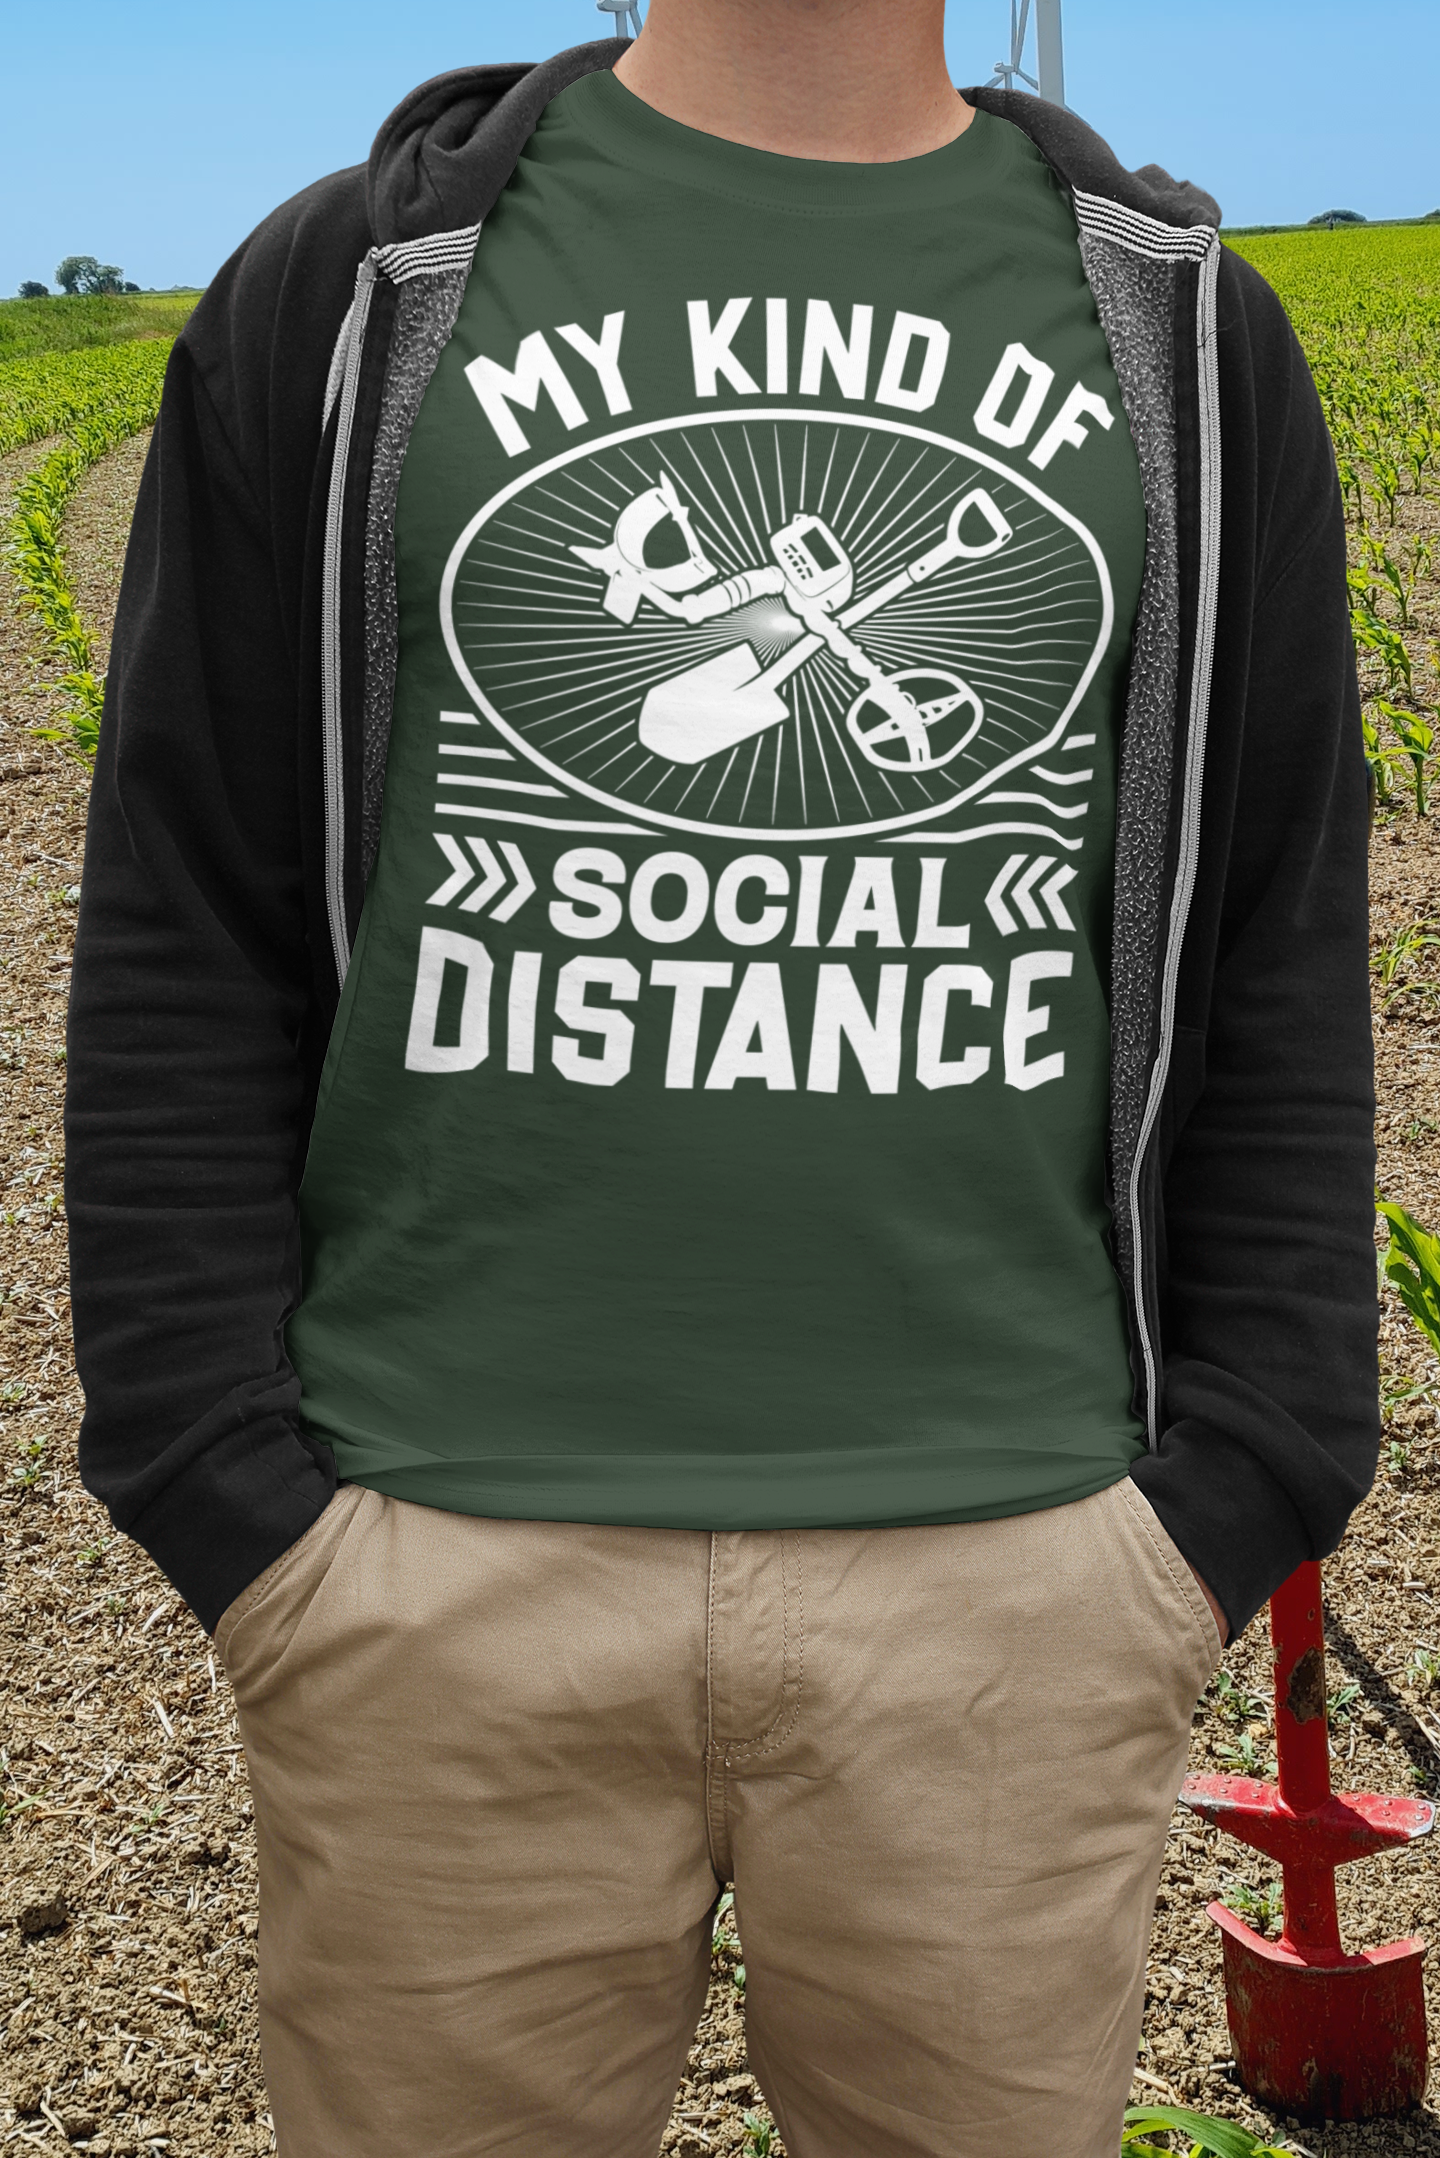 My kind of Social Distance T-shirt